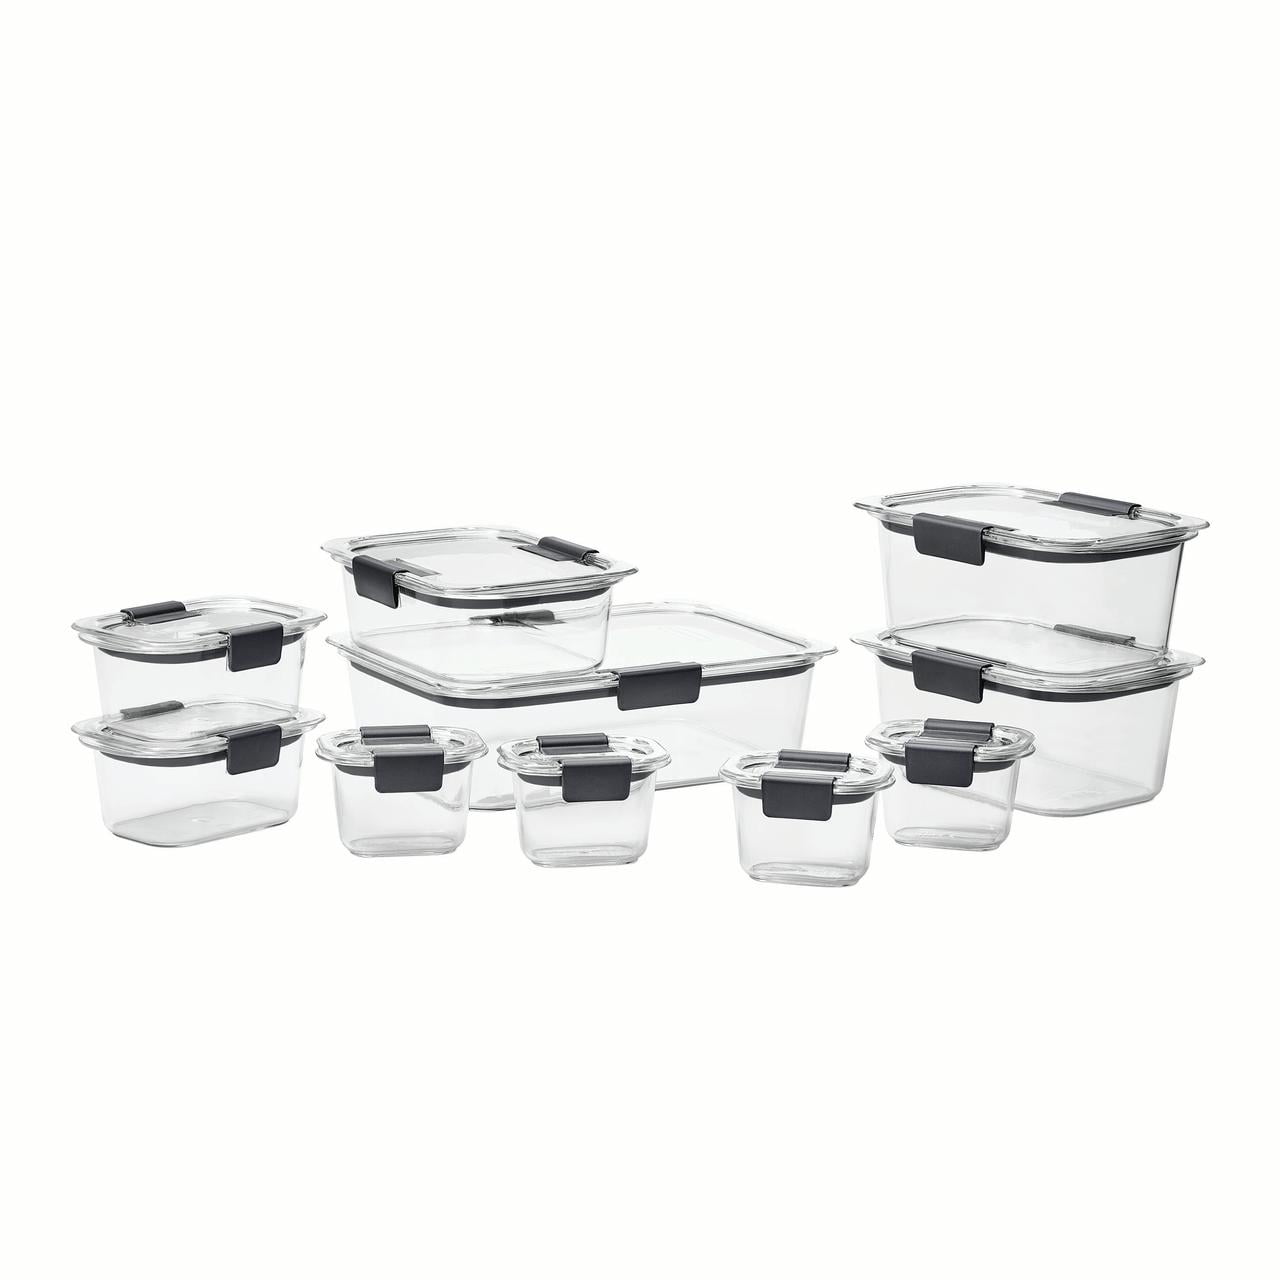 Rubbermaid Brilliance Pantry 20-Piece Set, 15 & 9-Piece Brilliance Food  Storage Containers for Pantry with Lids and Scoops for Flour, Sugar, and